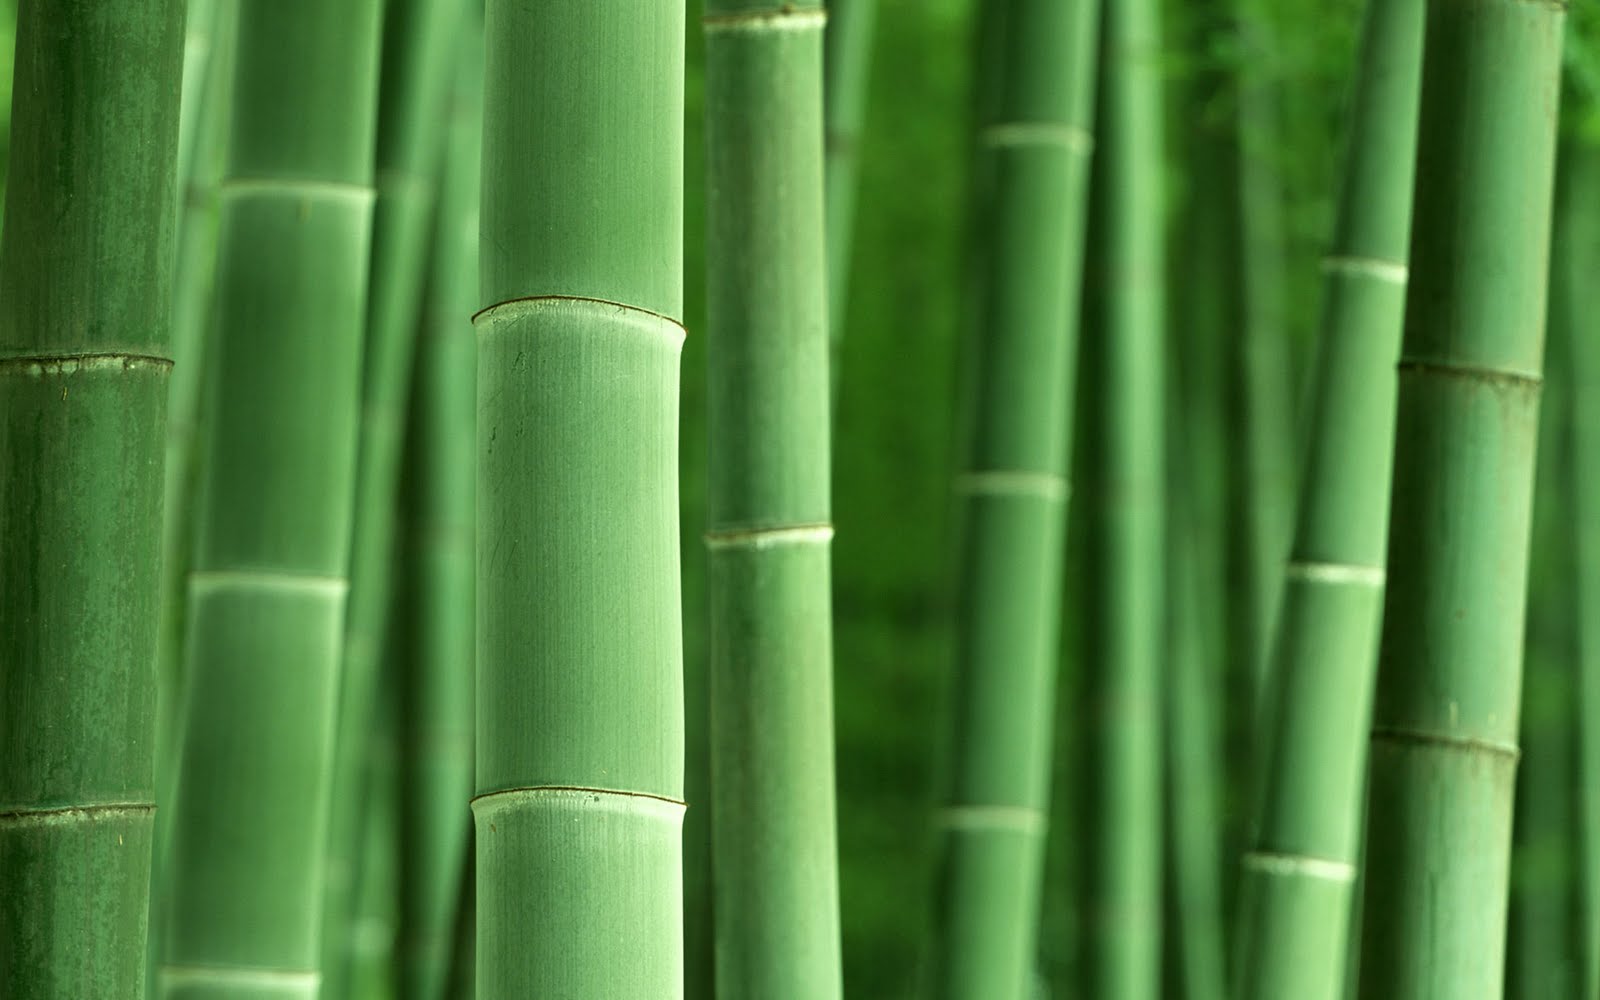 Hq Wallpaper Bamboo Forest High Definition Pictures